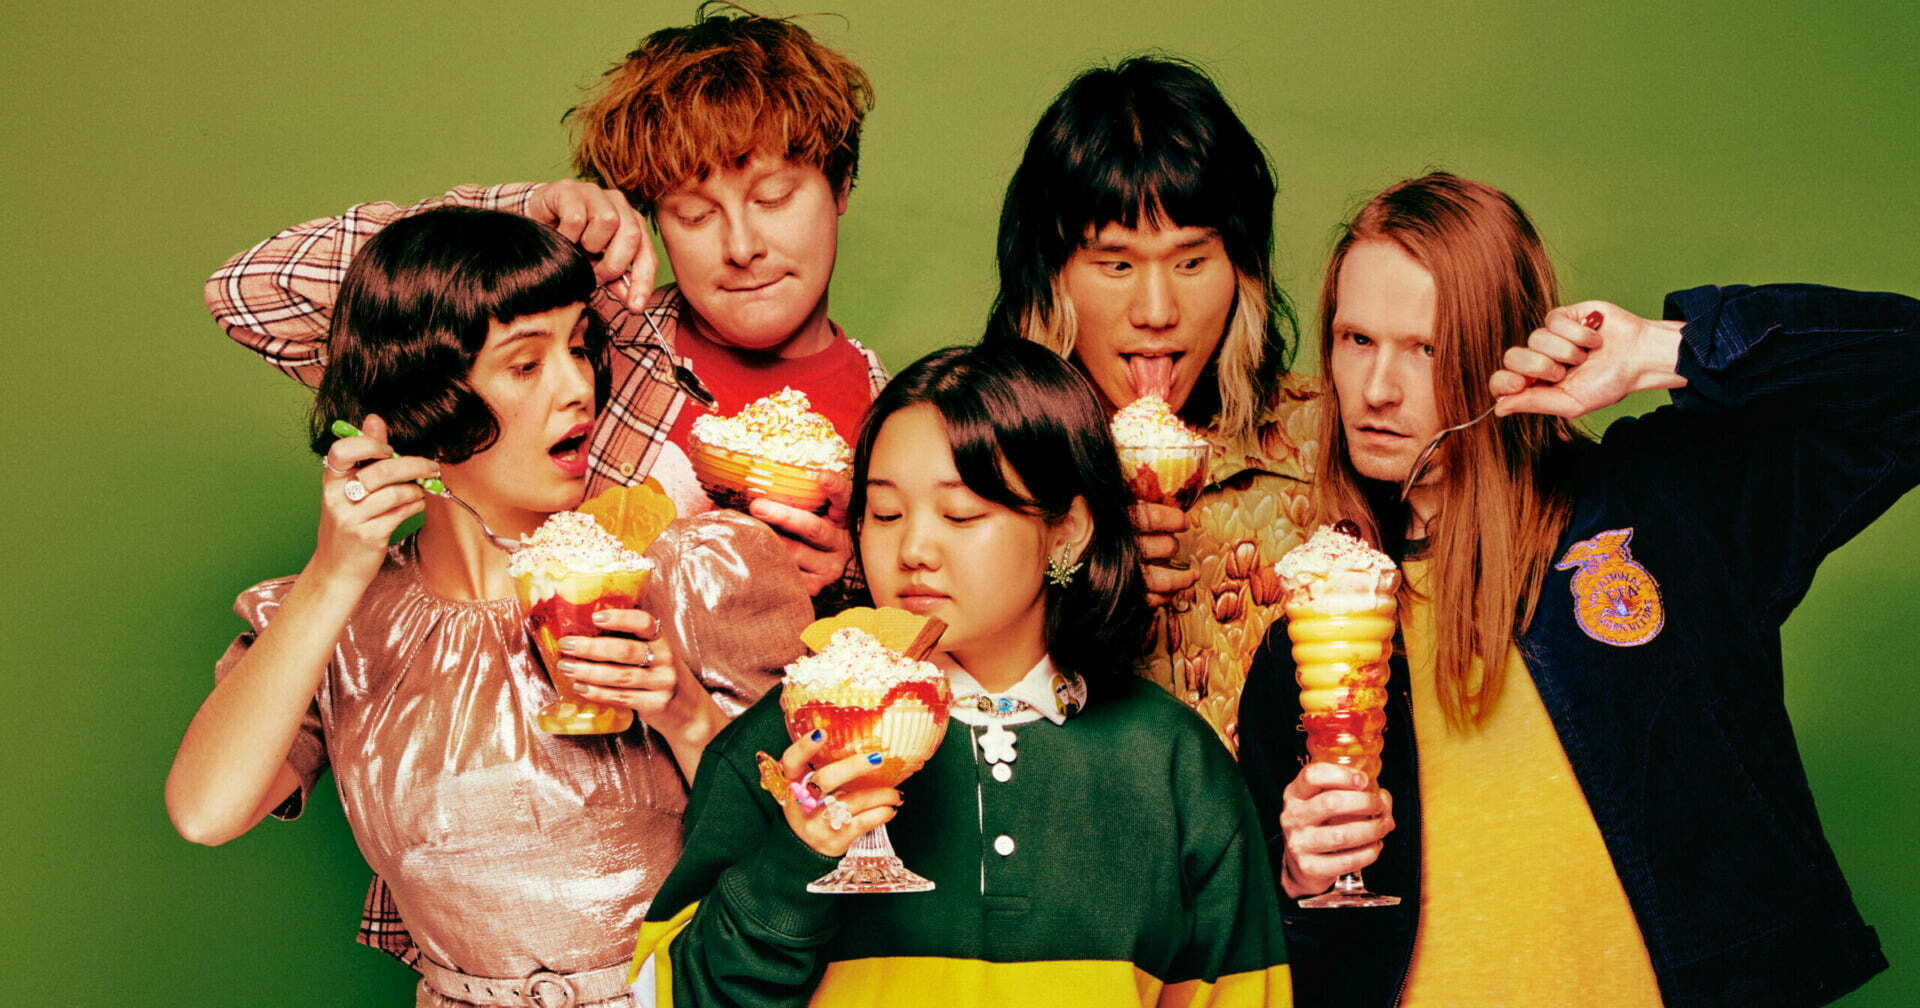 The video for Superorganism's new single "On & On" has been released.